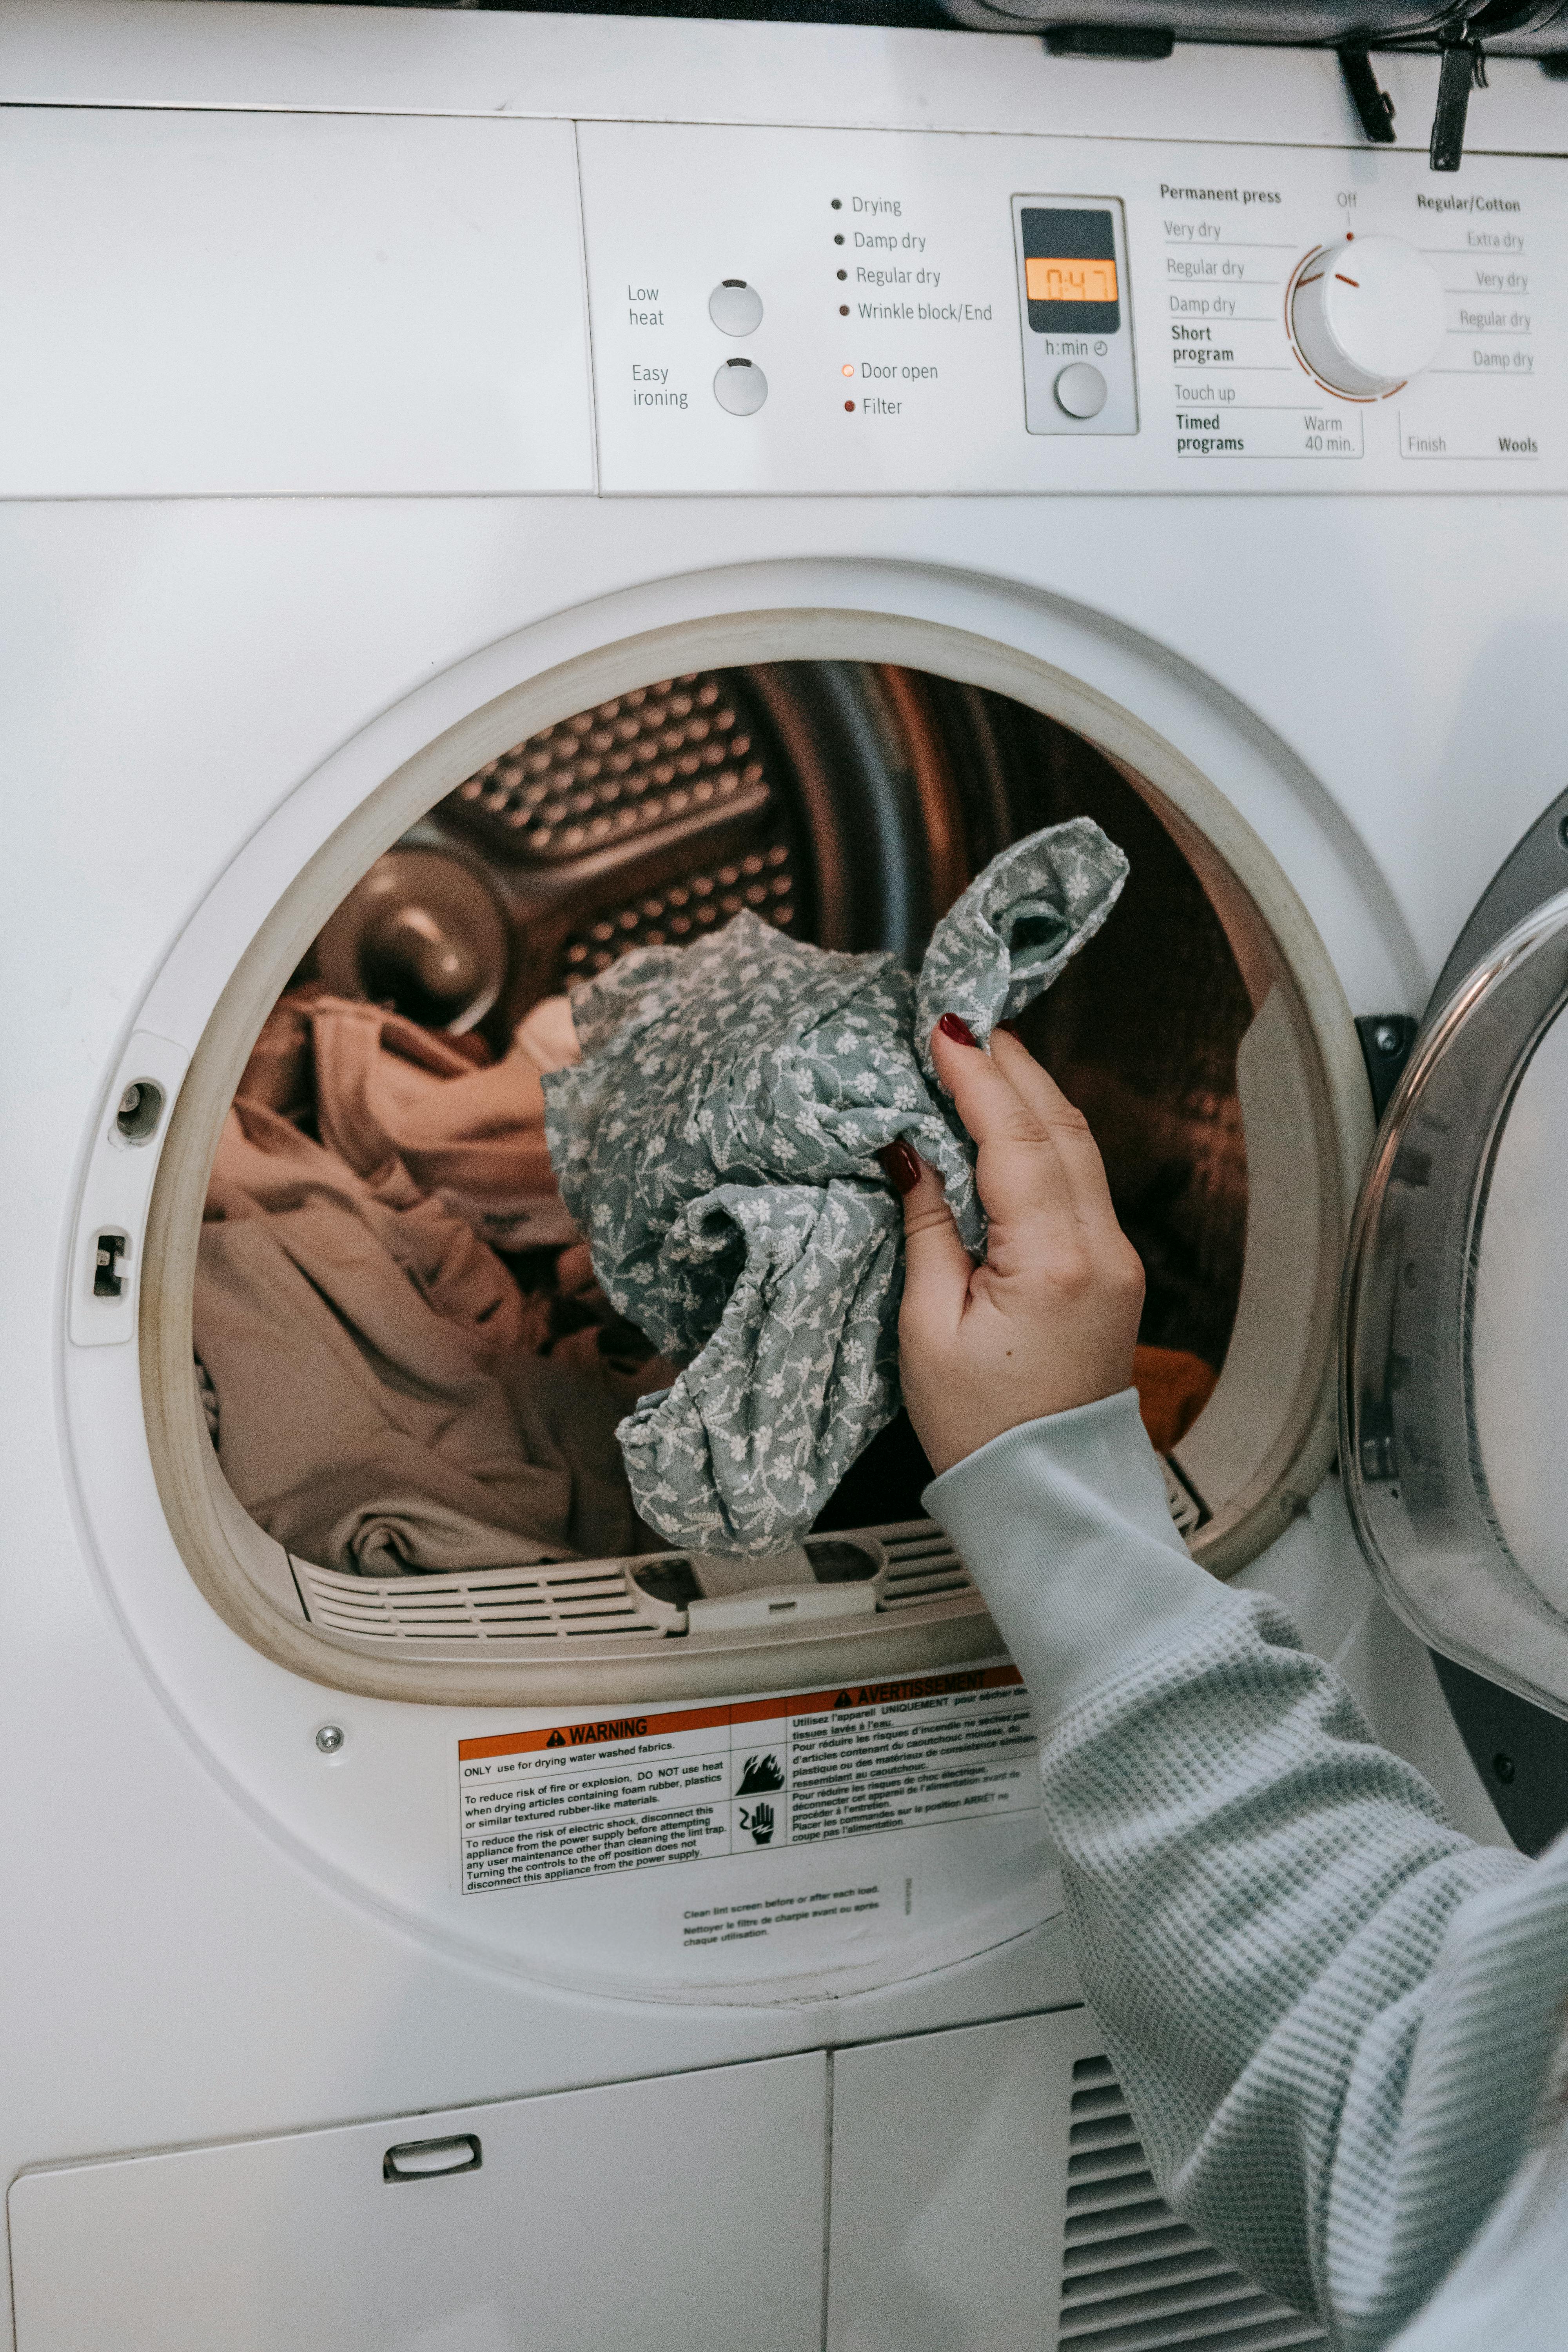 Laundry in the washing machine | Source: Pexels